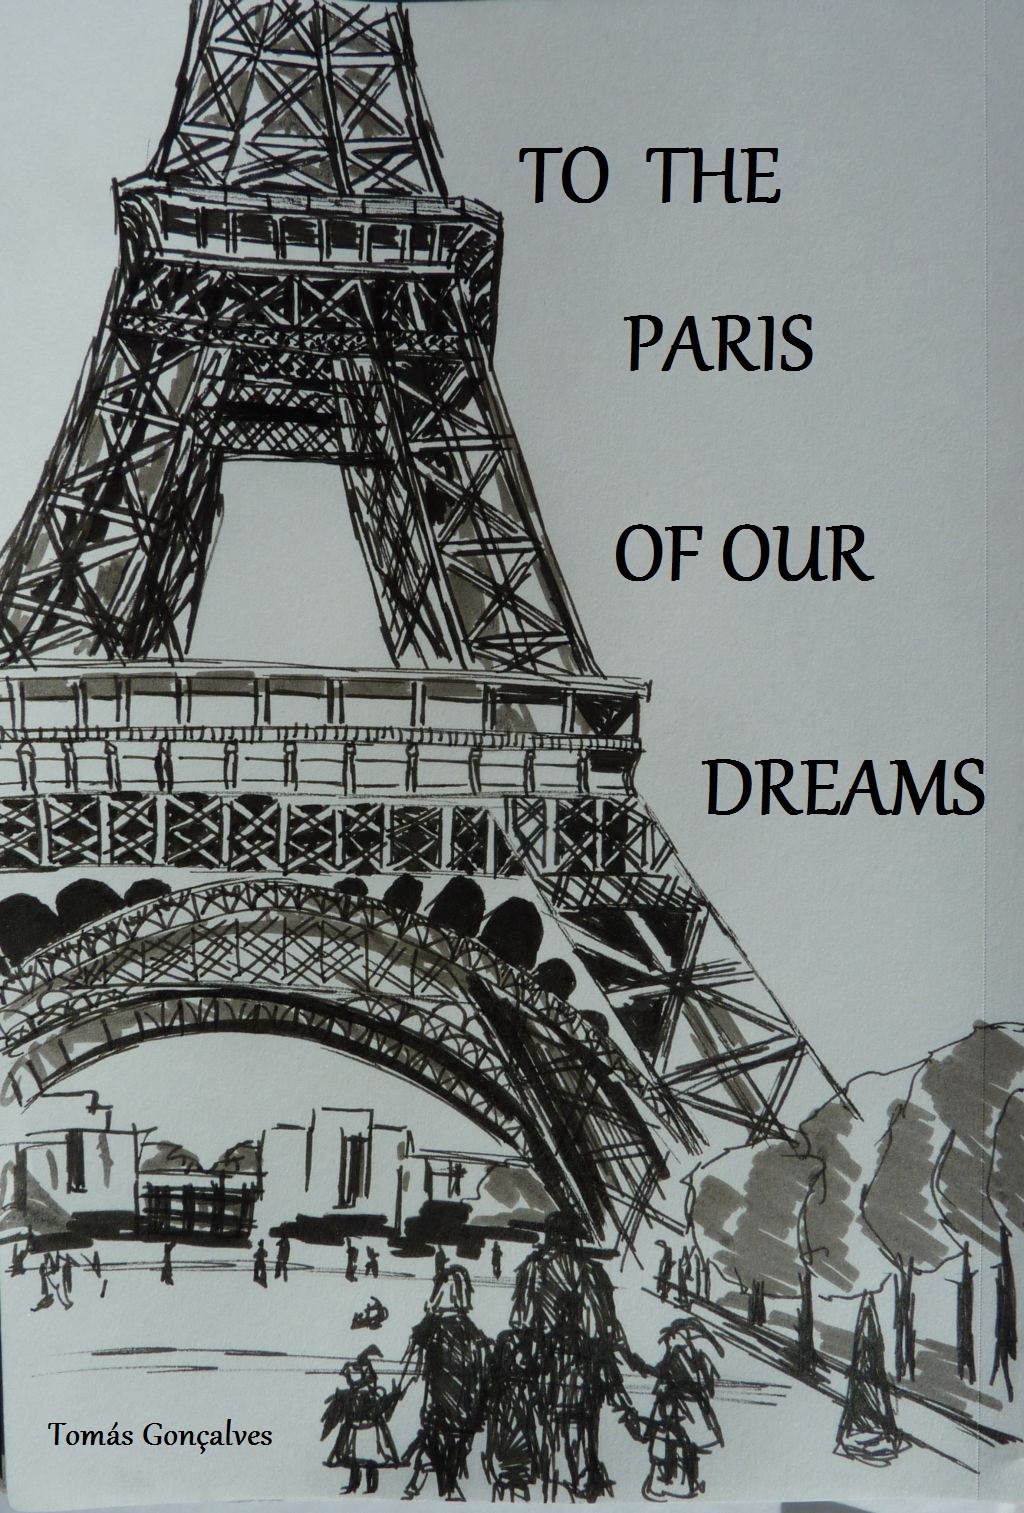 FREE: To the Paris of our dreams by Tomas Goncalves